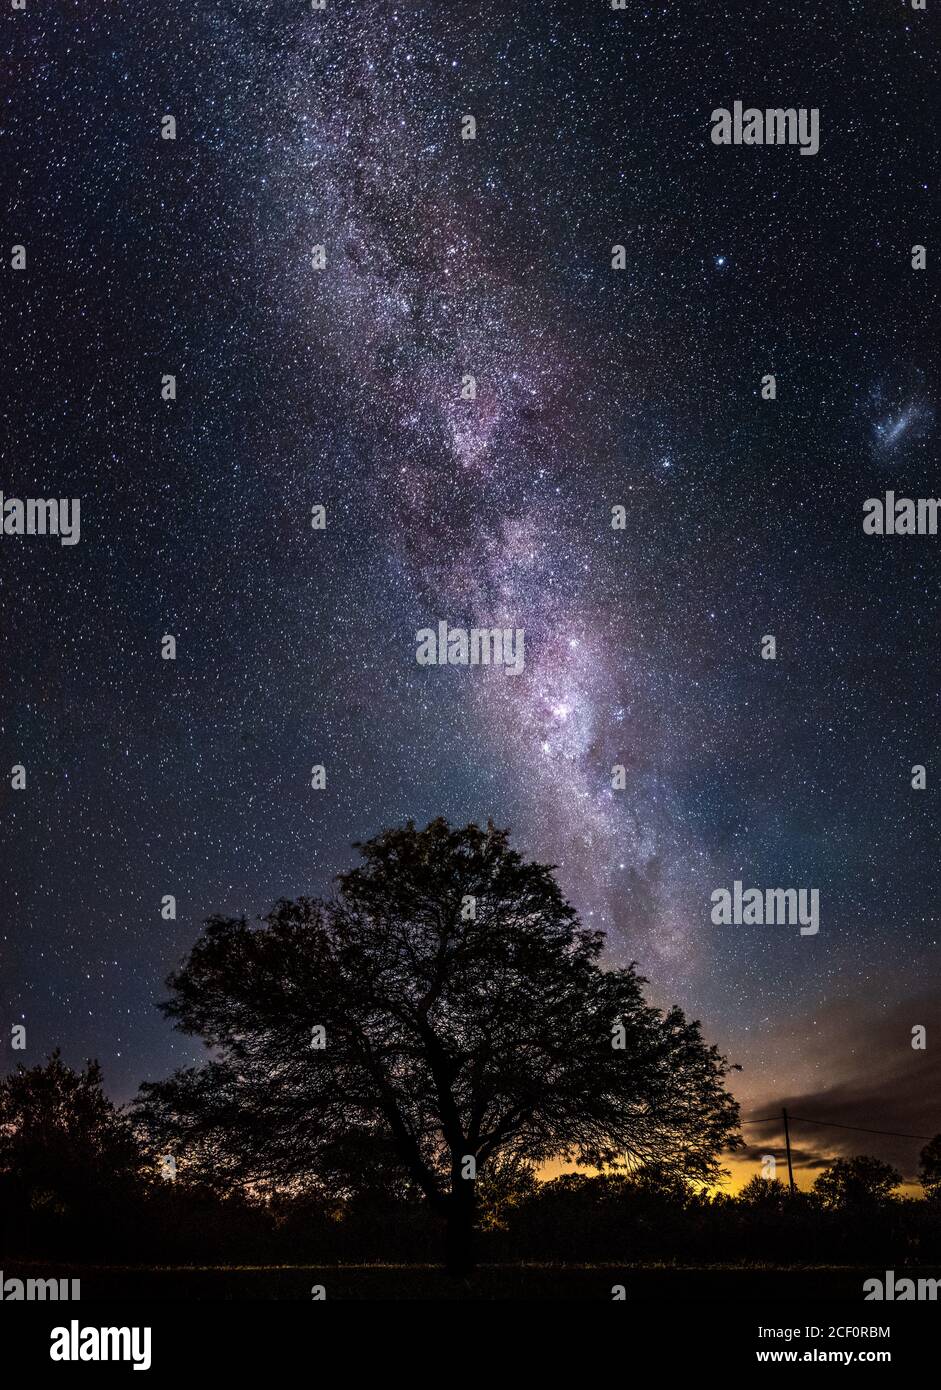 Amazing night scene of the milky way falling toward a silhouette of leafy tree with millions of stars as sand in the sky Stock Photo